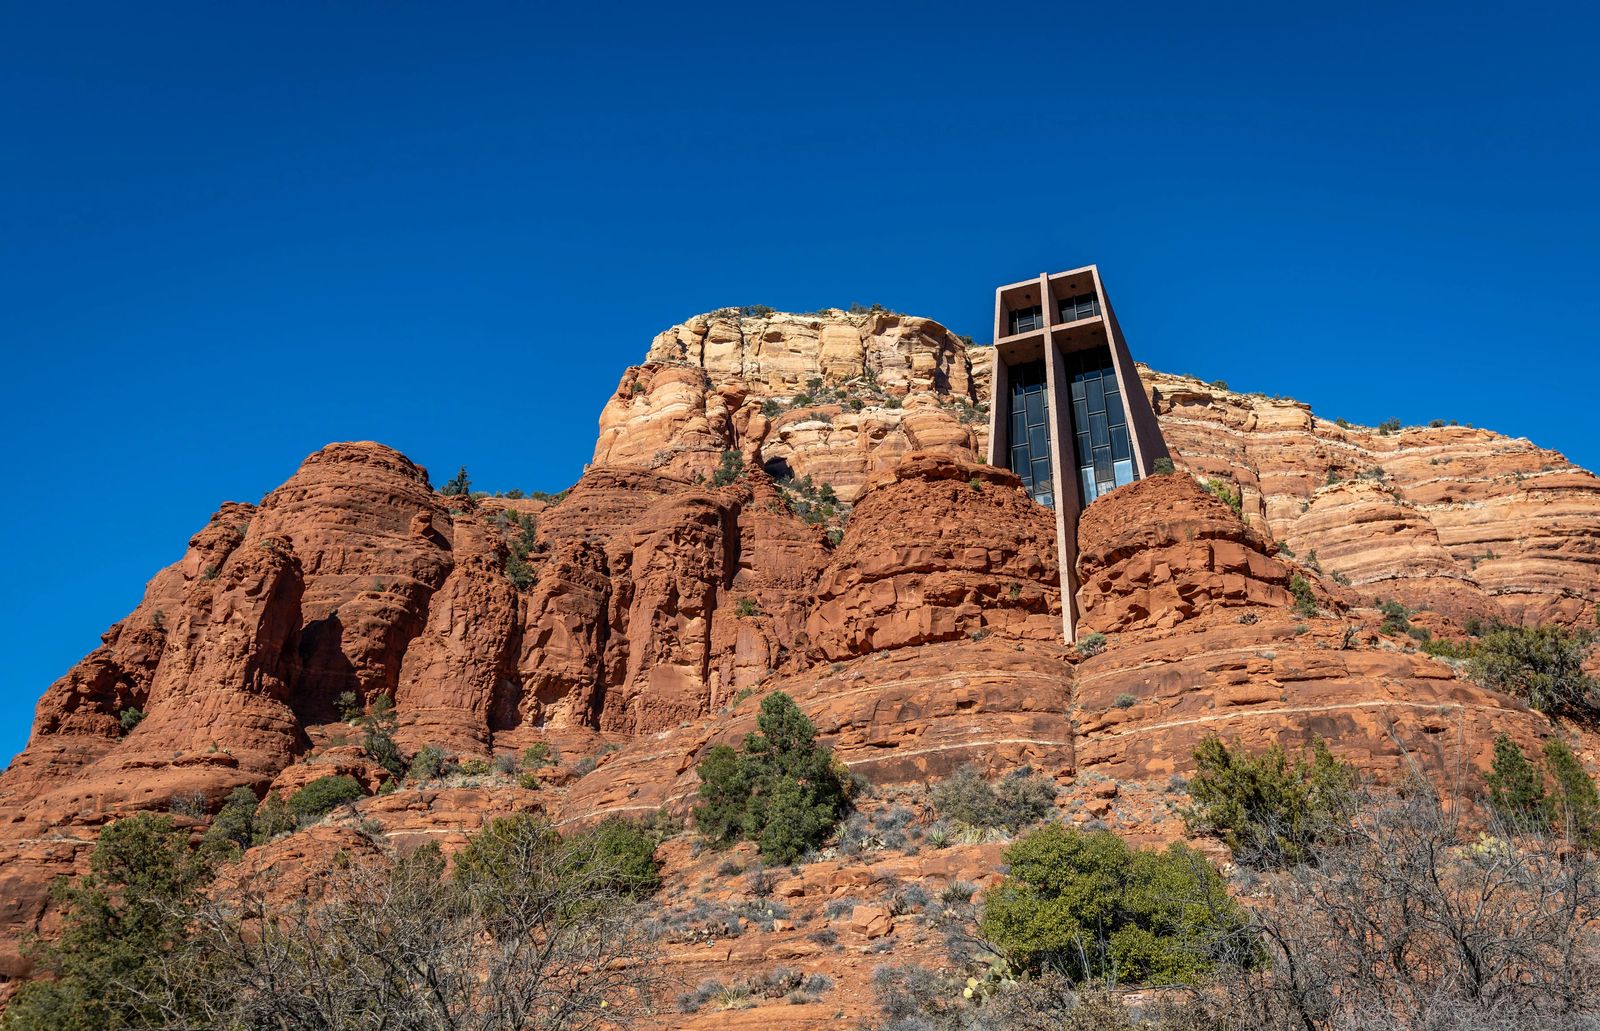 Giant Cross in Chapel - Things to do in Sedona